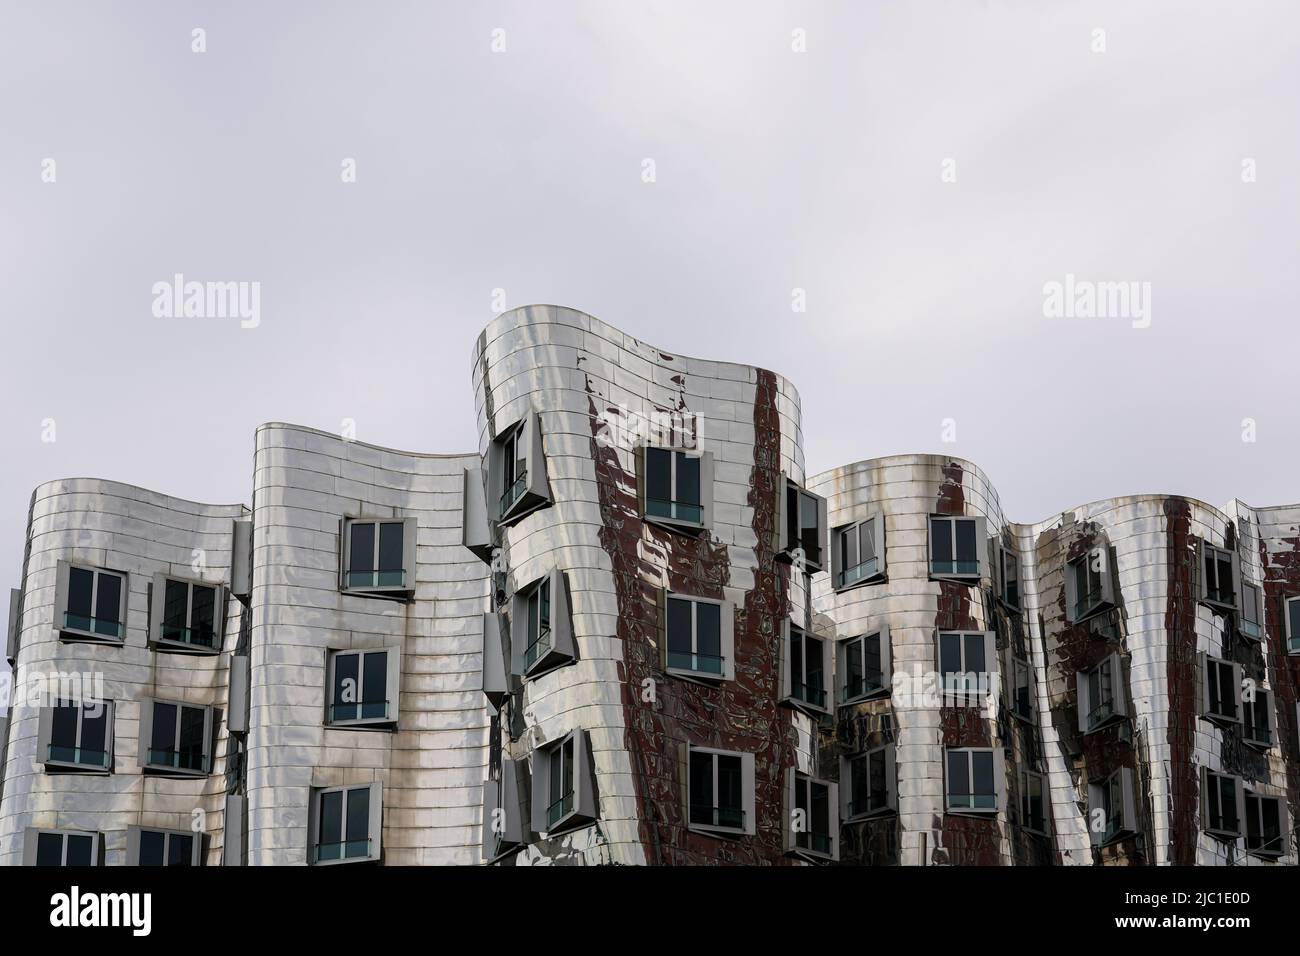 House B by architect Frank O. Gehry in the Media Harbor with an undulating stainless steel facade Düsseldorf, North Rhine-Westphalia, Germany, 23.5.22 Stock Photo